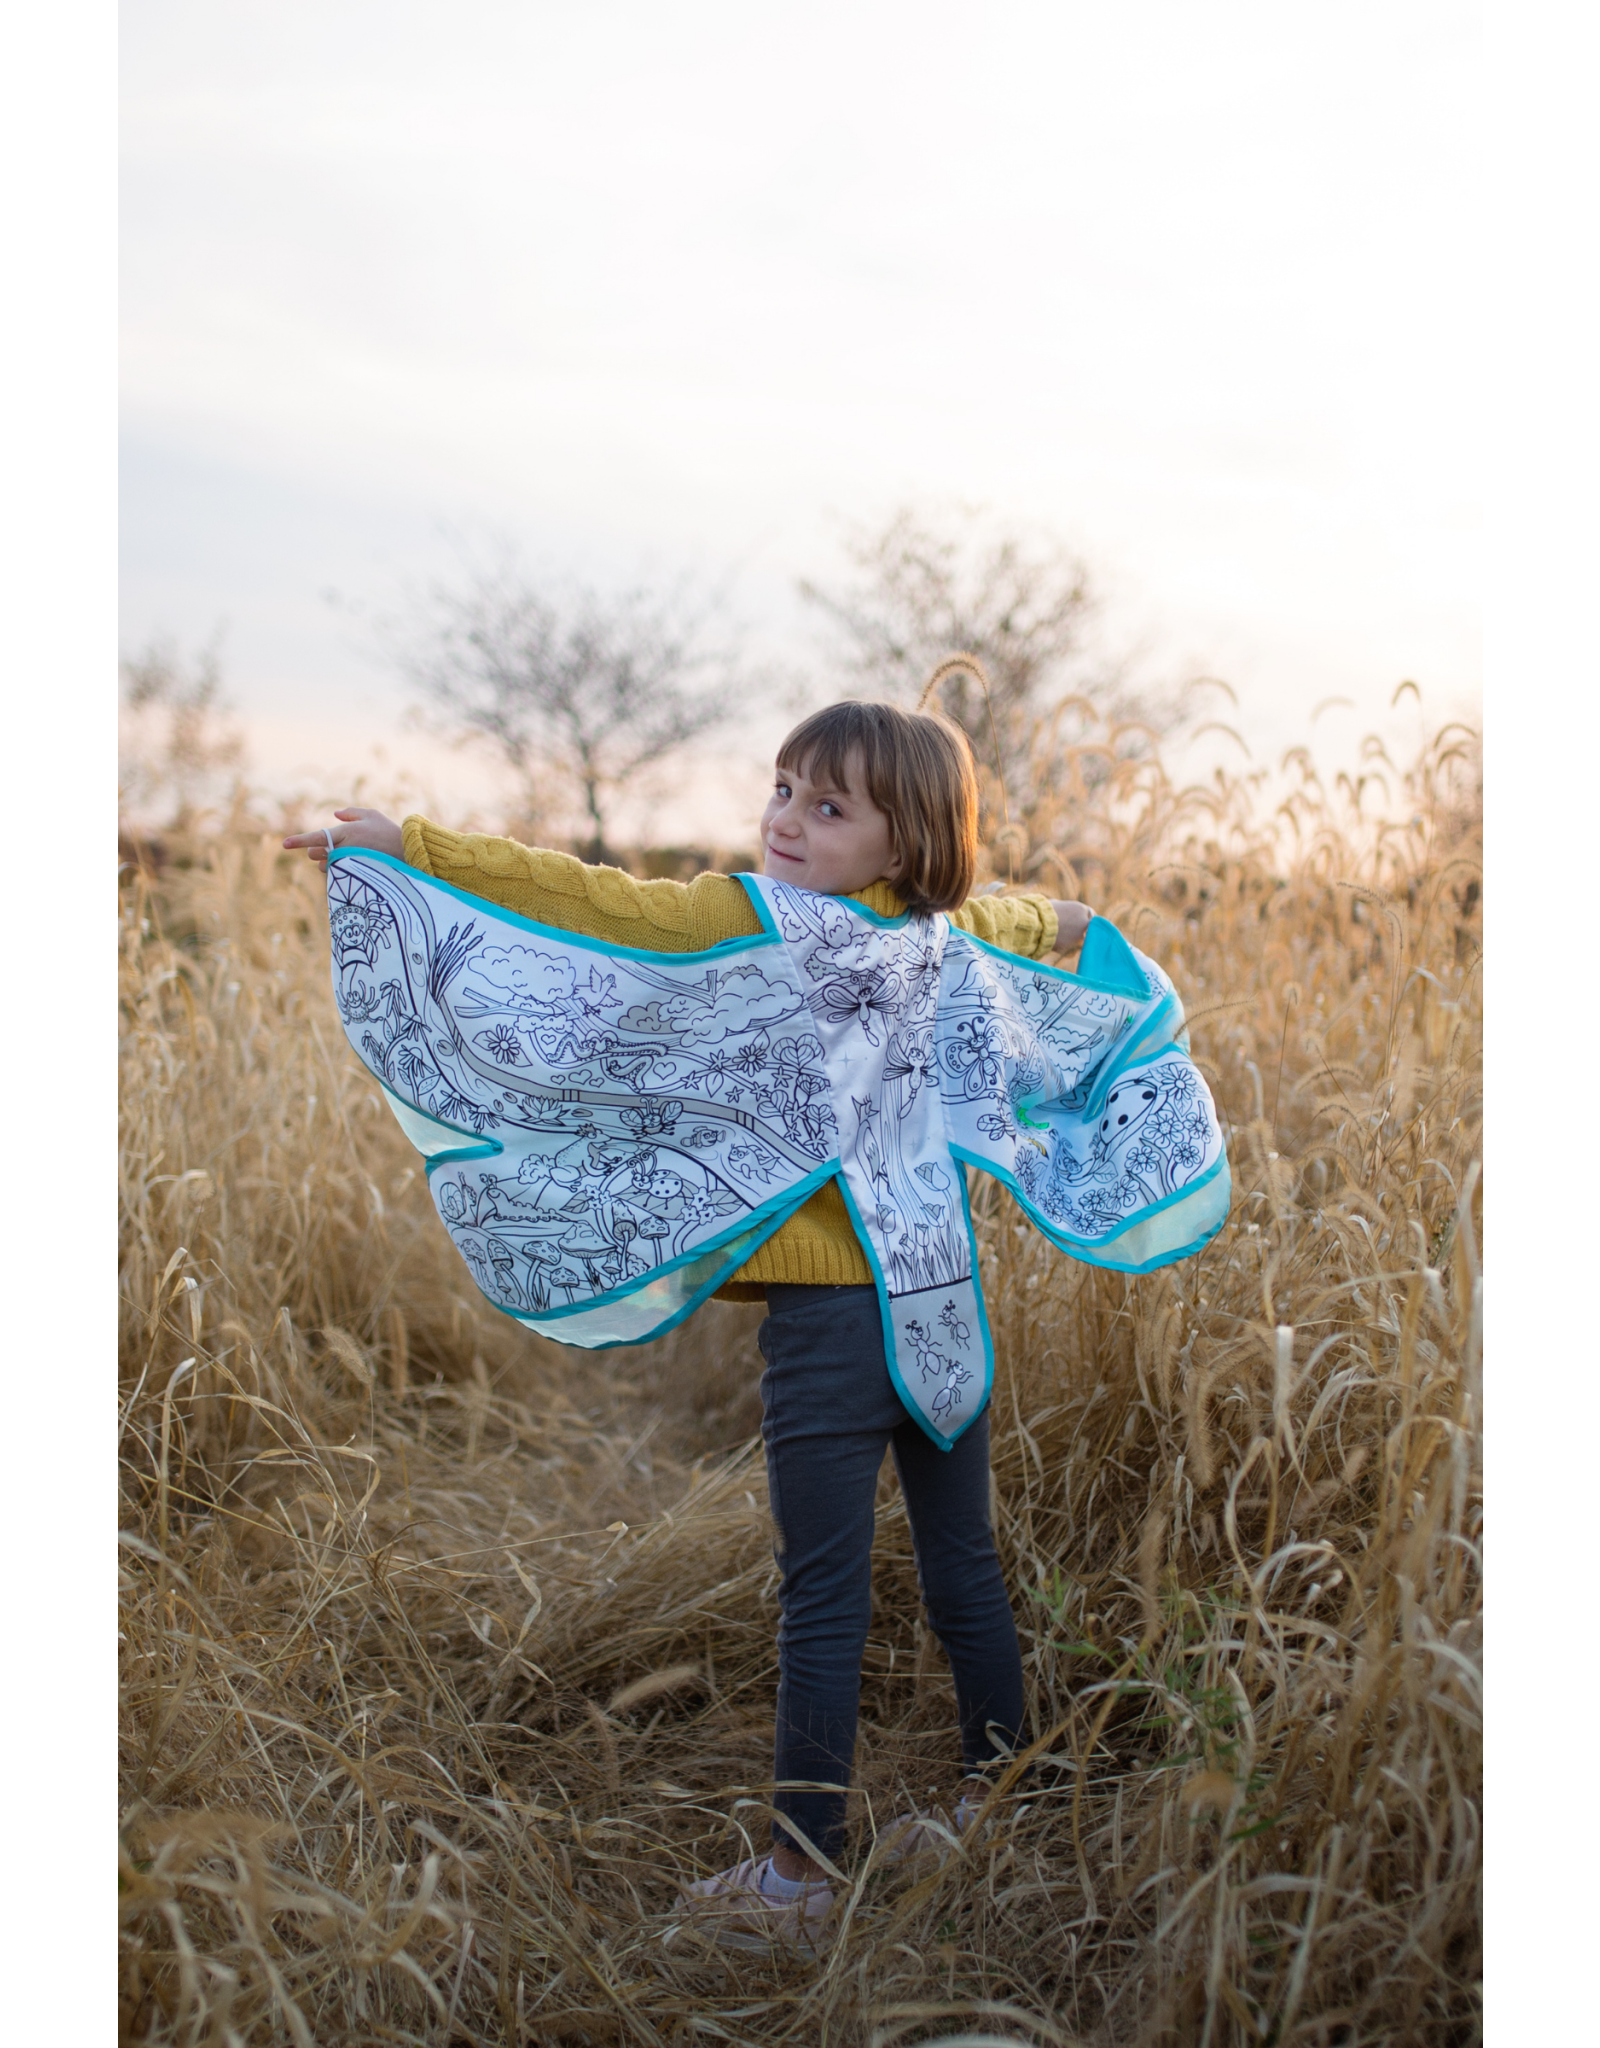 Great Pretenders Color-A-Cape Dragonfly Wings